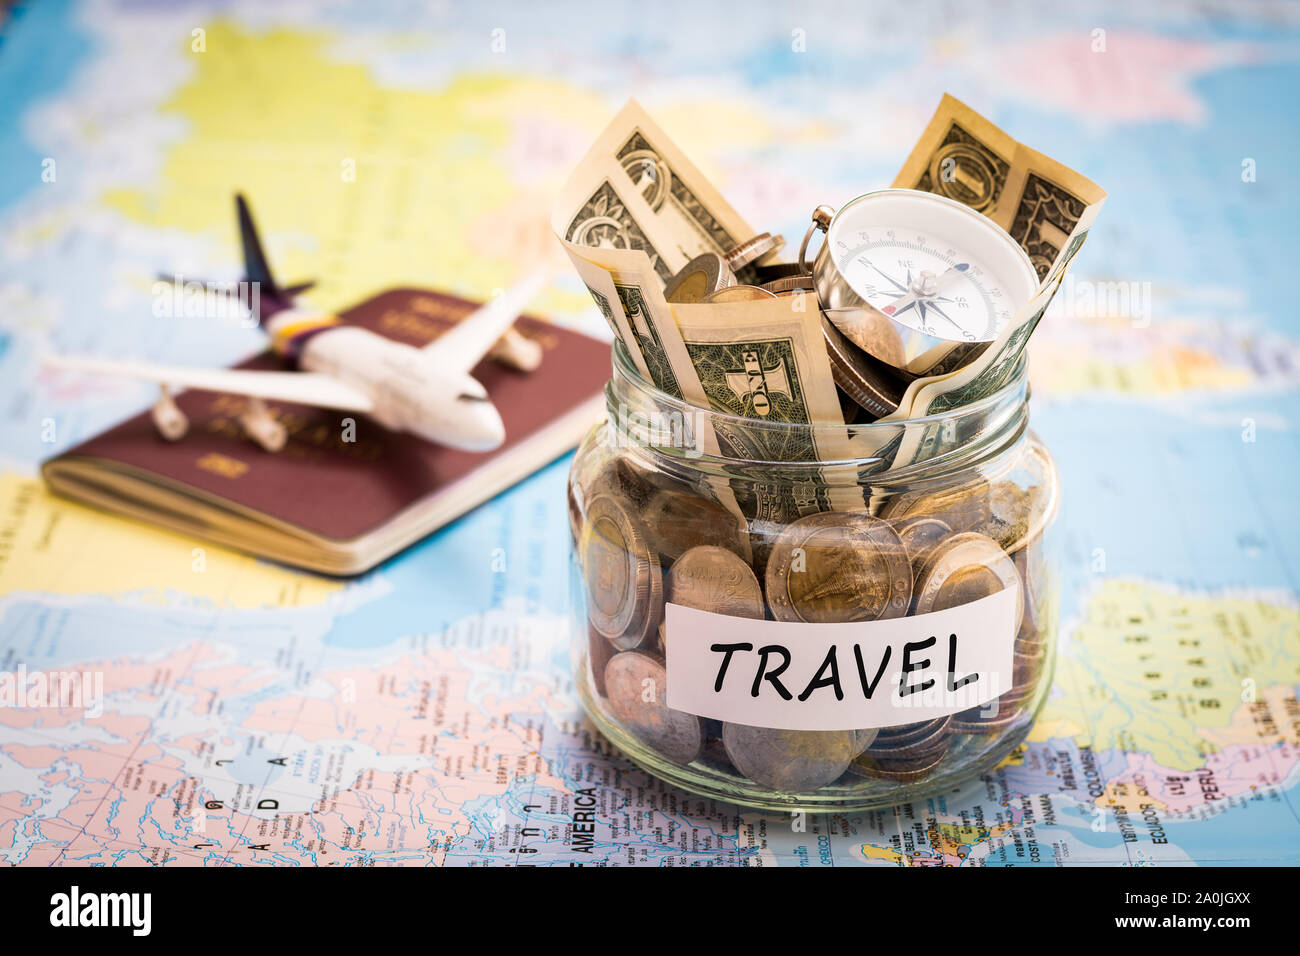 Travel budget concept. Travel money savings in a glass jar with compass, passport and aircraft toy on world map Stock Photo